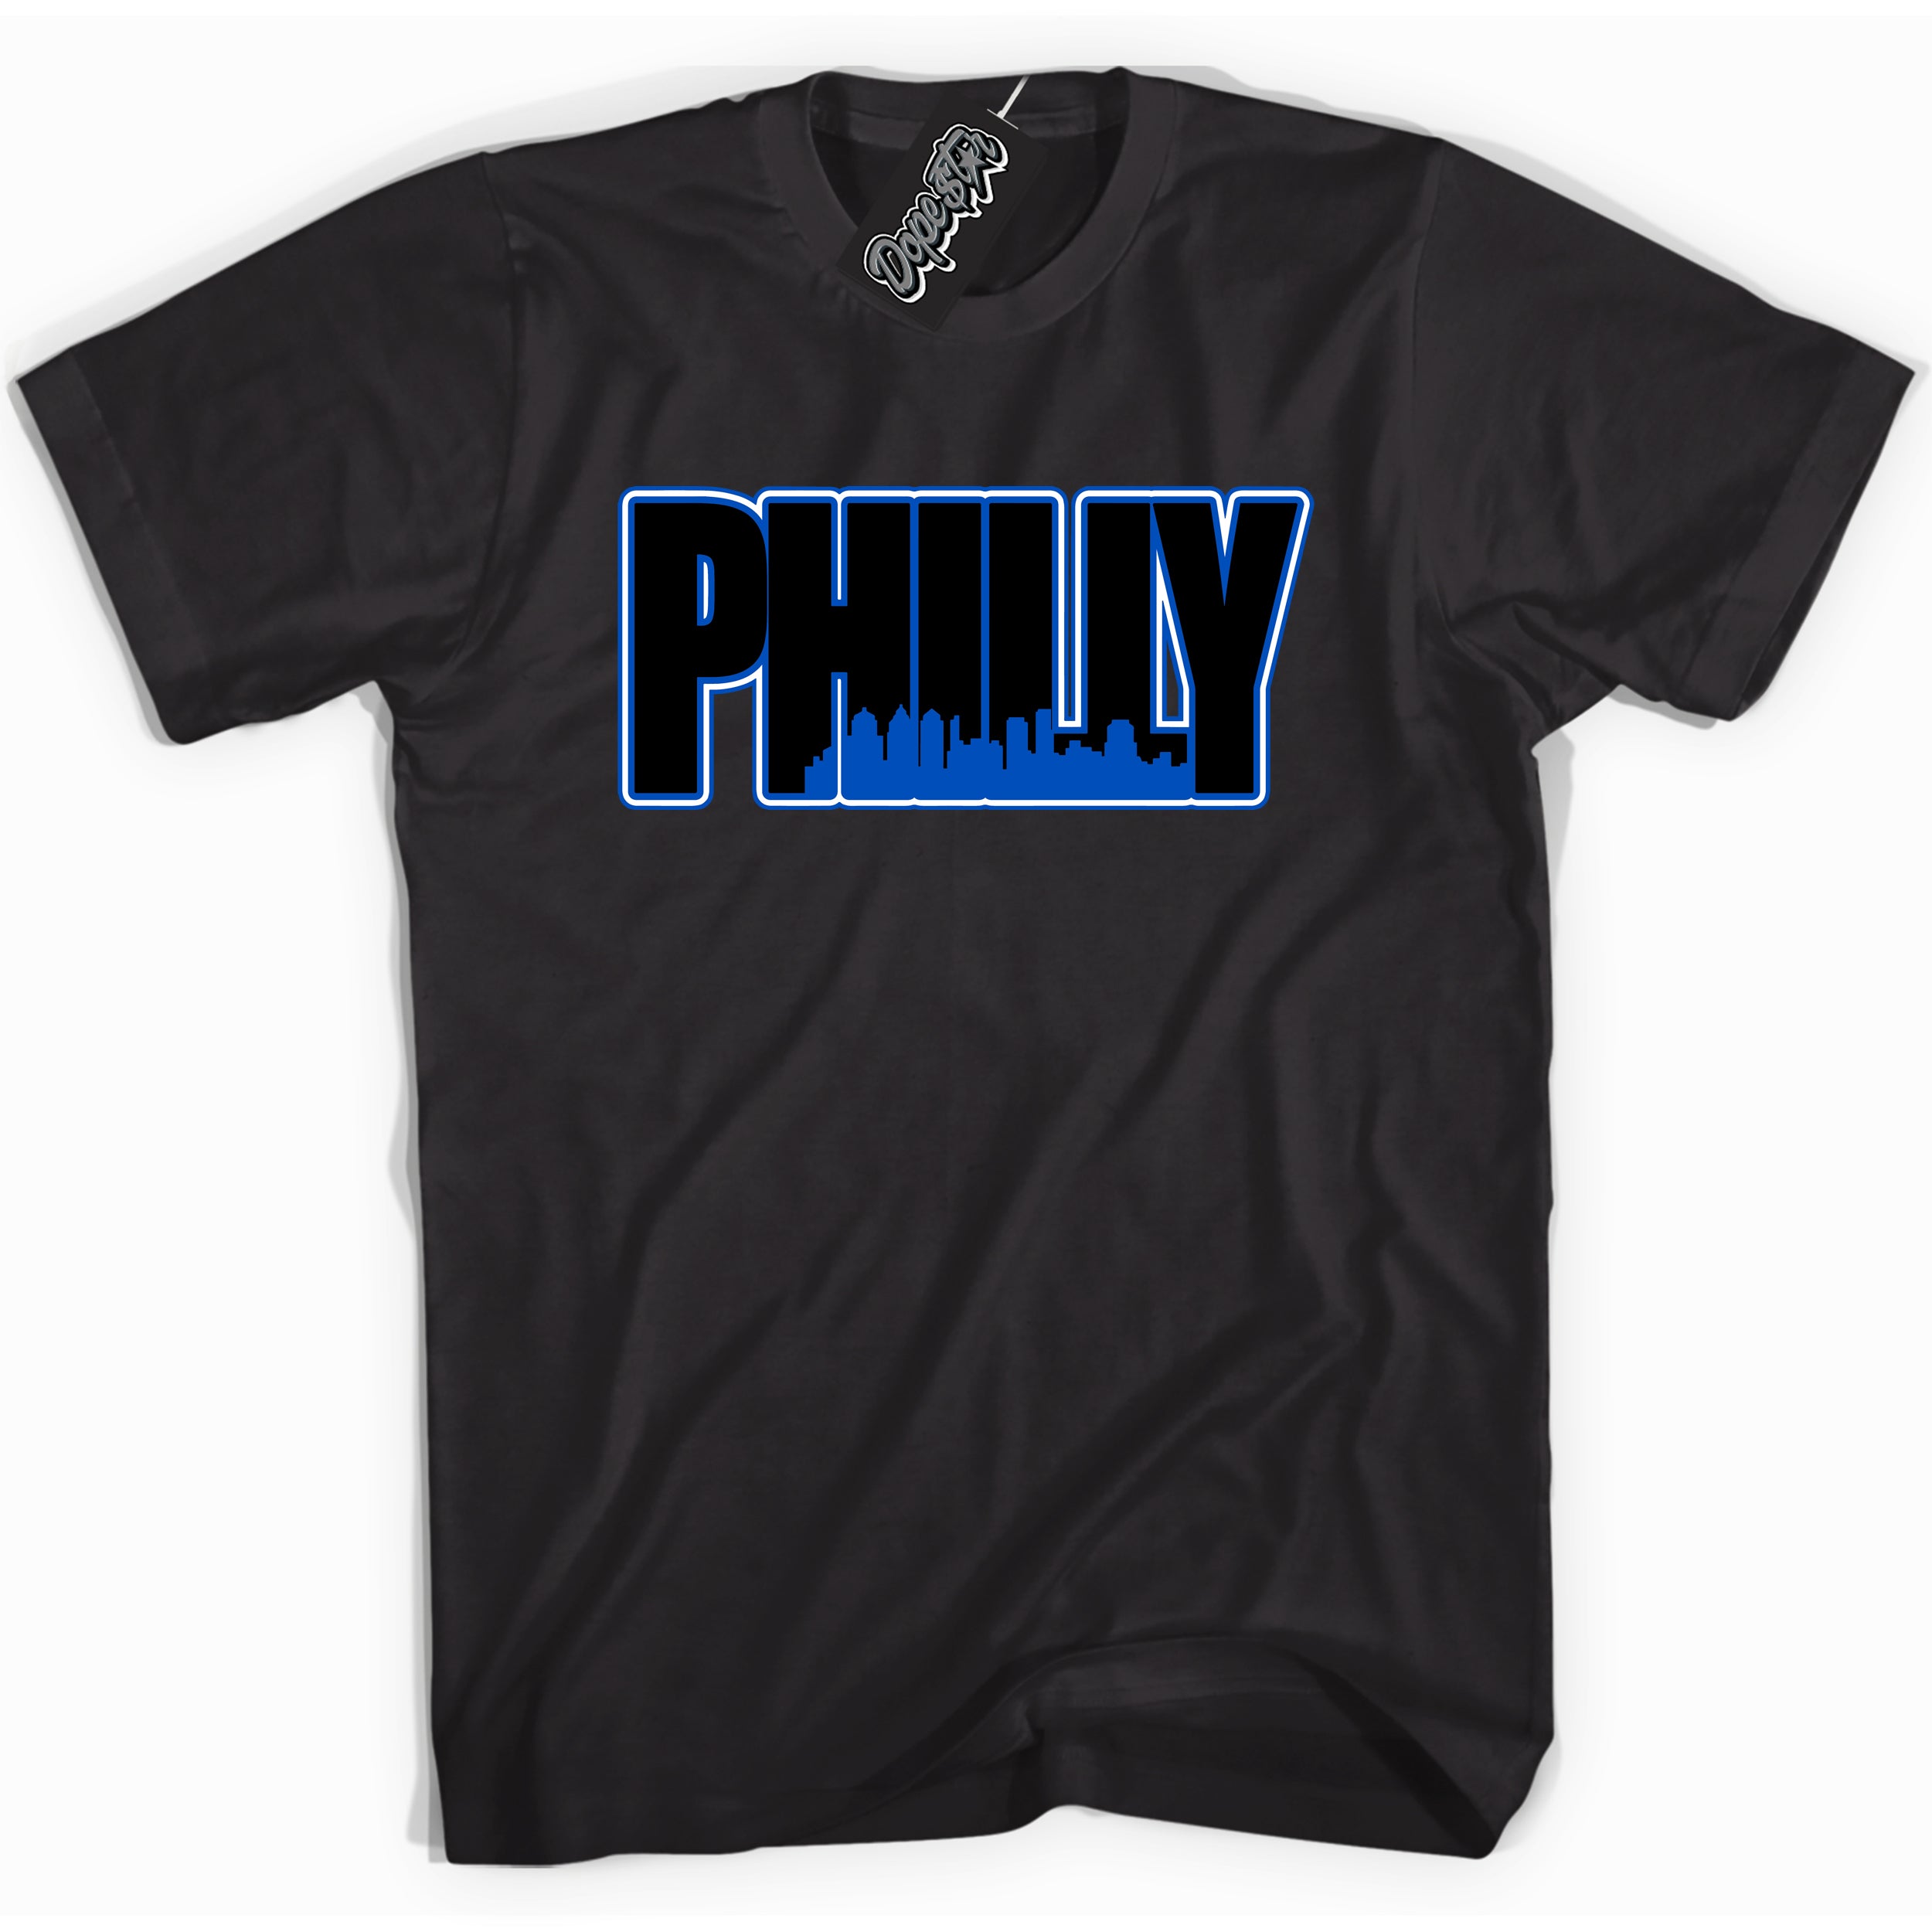 Cool Black graphic tee with Philly print, that perfectly matches OG Royal Reimagined 1s sneakers 